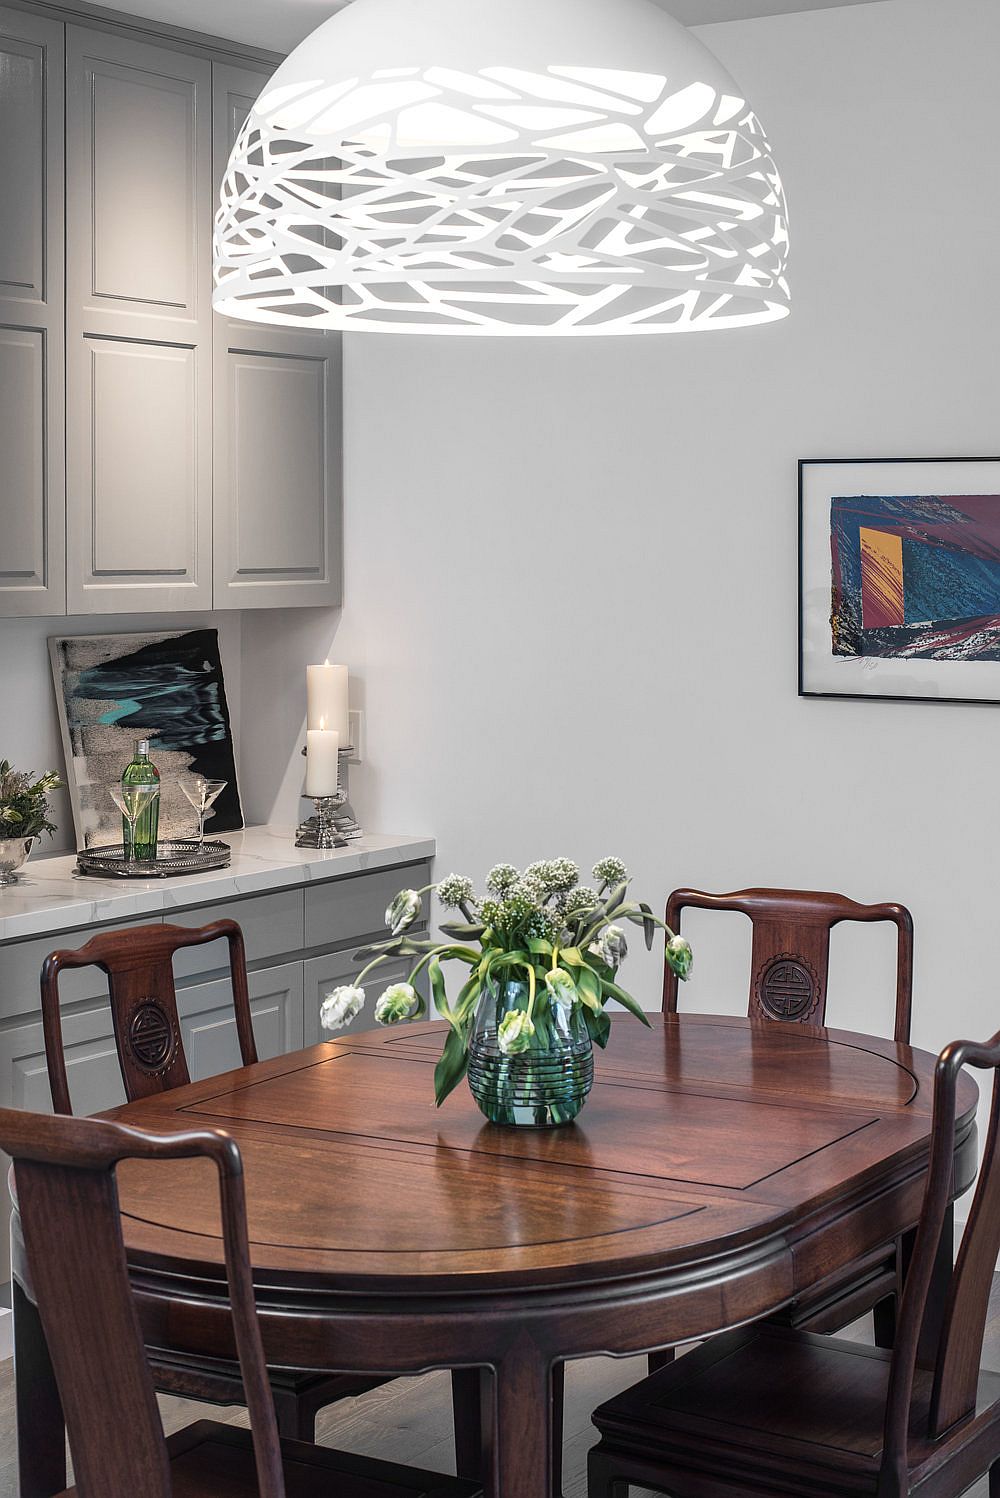 Pendant offers perfect lighting for the small dining area